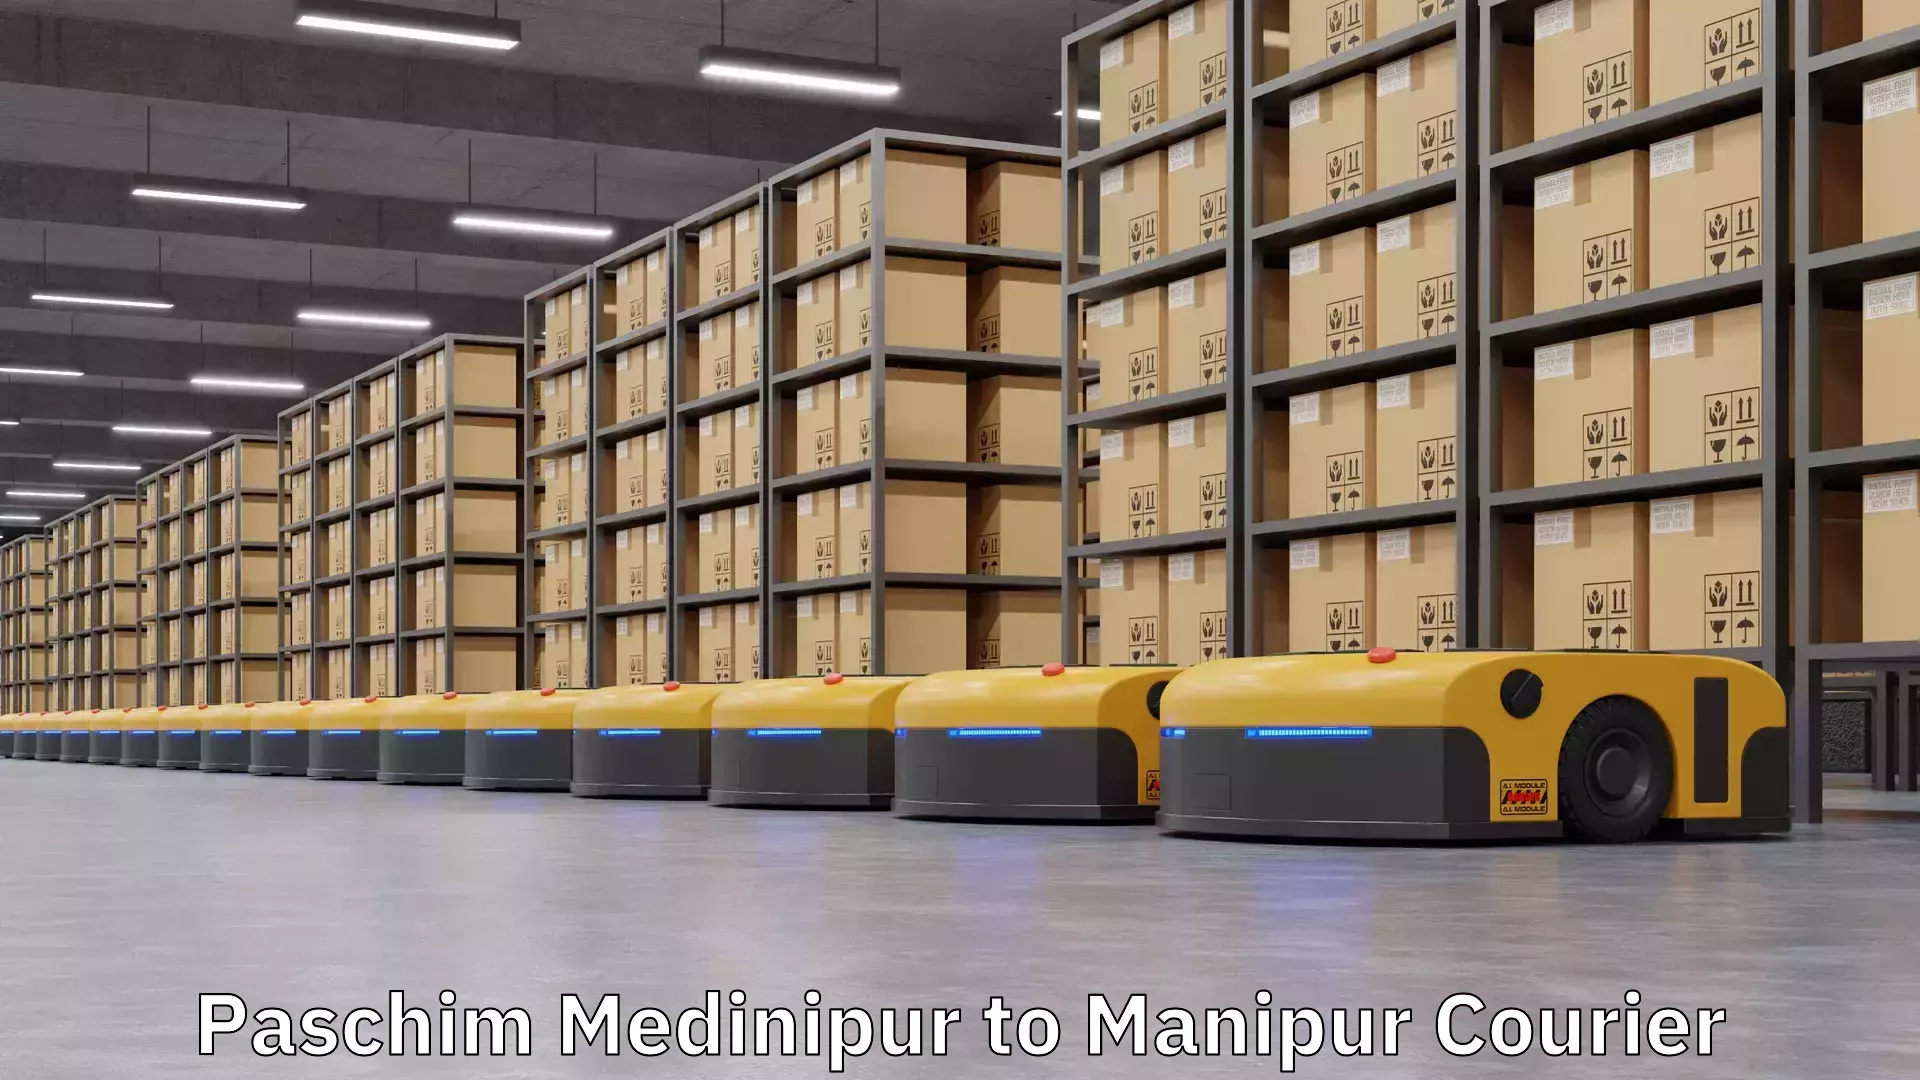 State-of-the-art courier technology Paschim Medinipur to Manipur